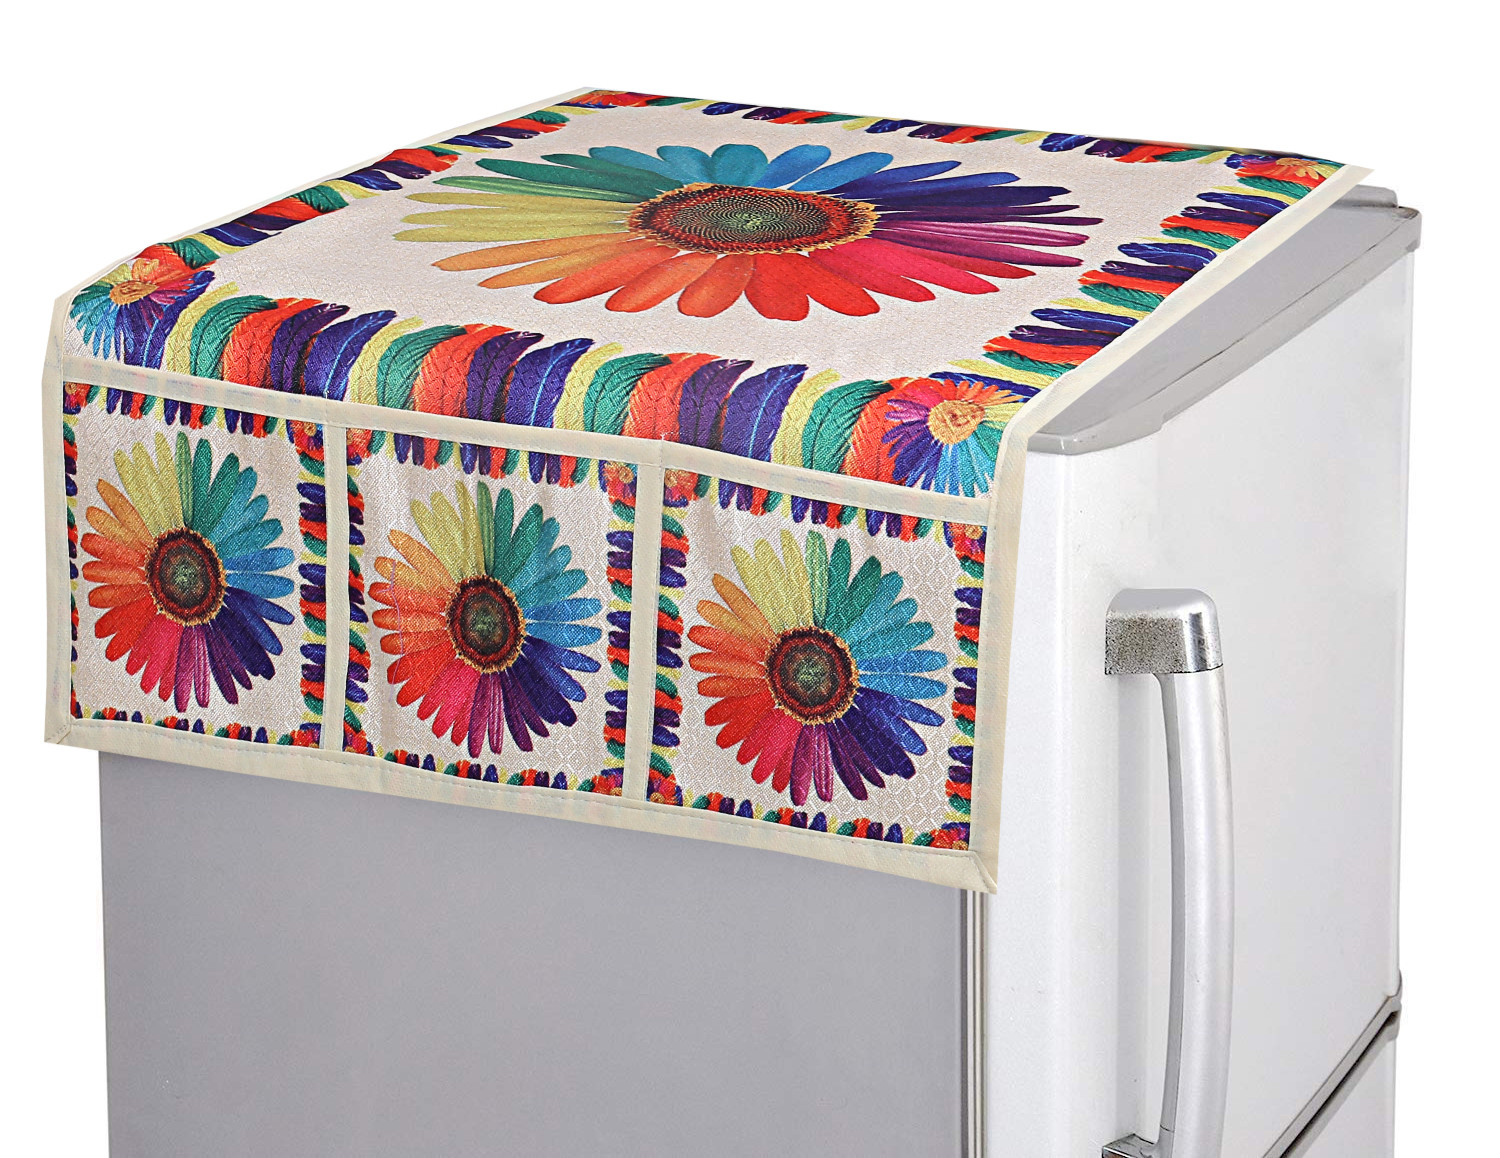 Kuber Industries Flower Print Jute 3-Layered Fridge/Refrigerator Top Cover with 6 Utility Pockets,Gold